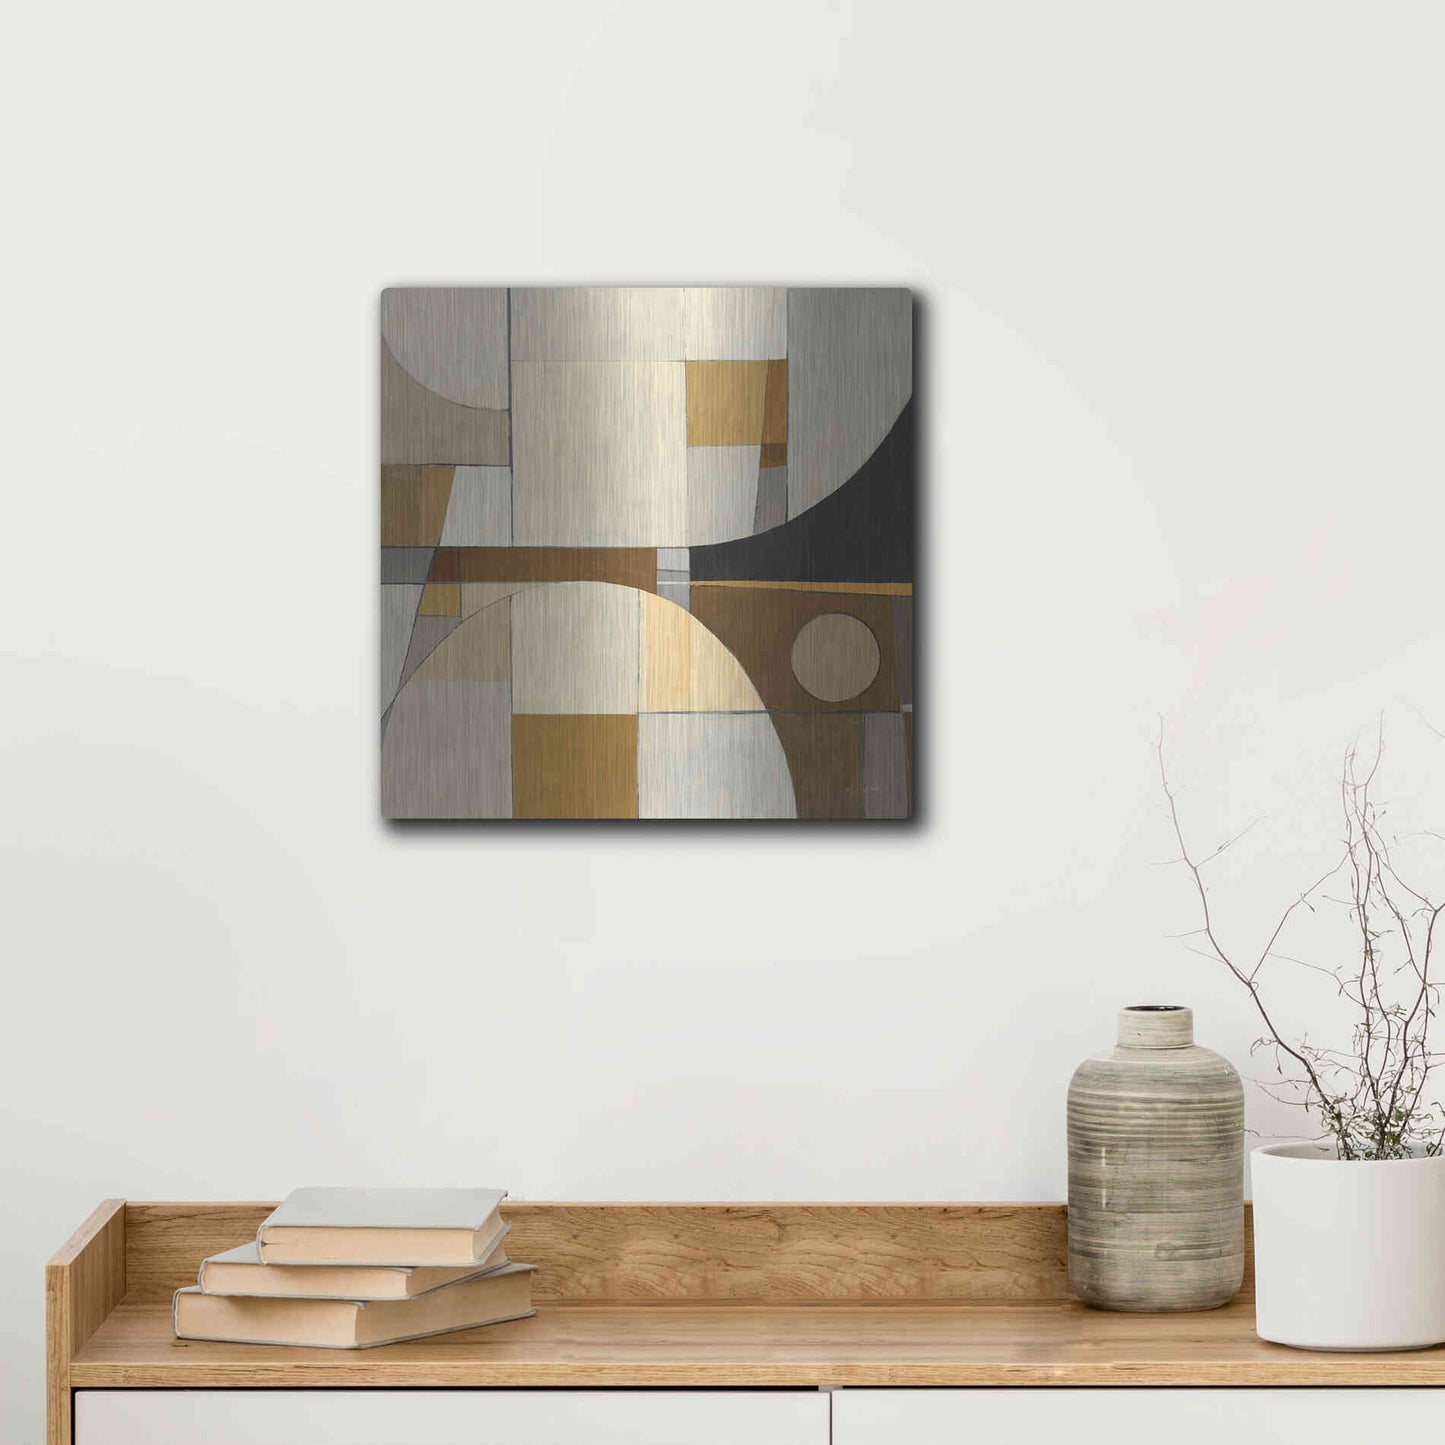 Luxe Metal Art 'Champagne IV Crop' by Mike Schick, Metal Wall Art,12x12